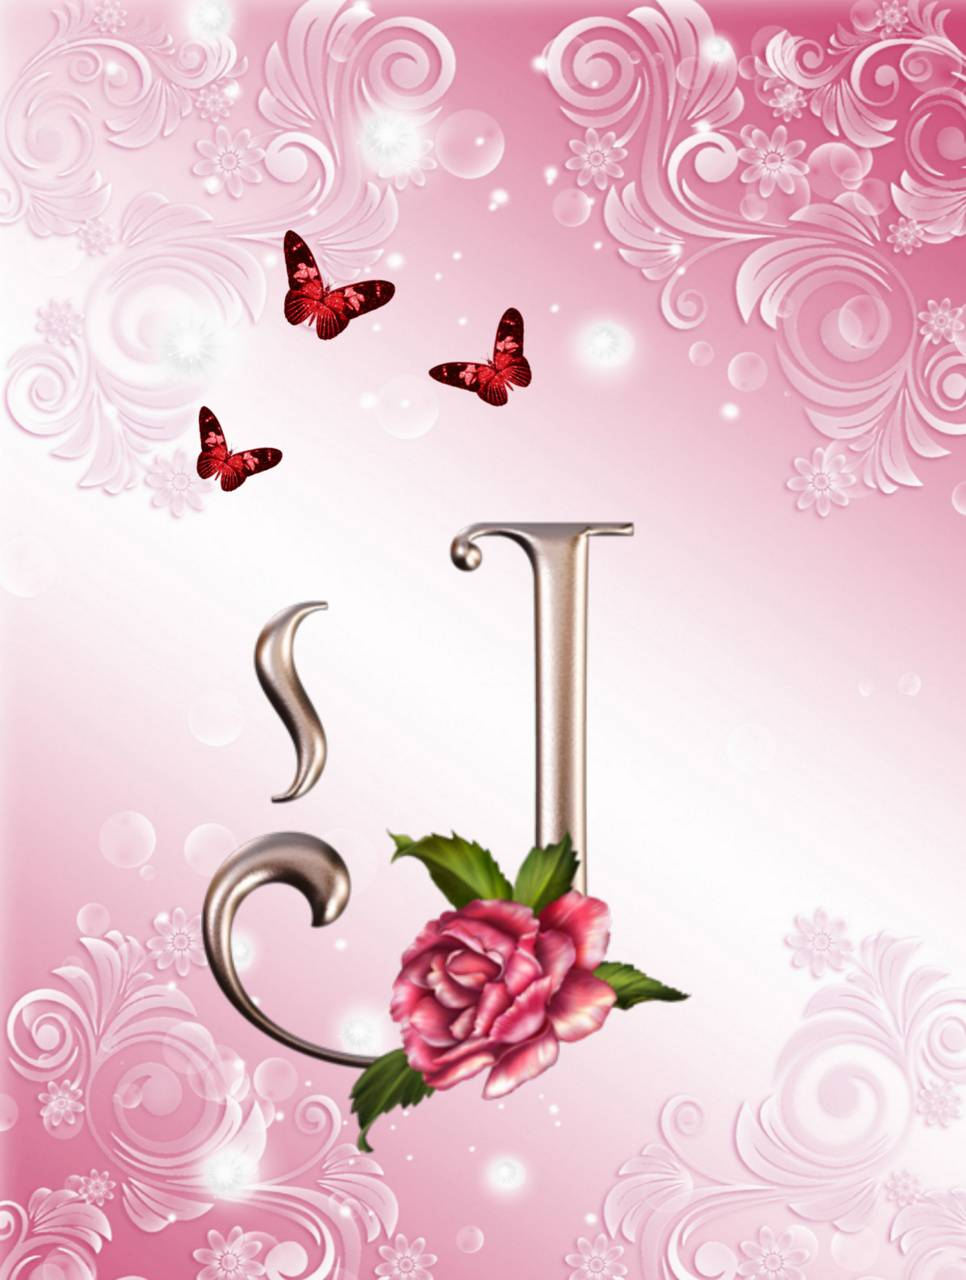 Classic and elegant floral alphabet font letter U, free image by  rawpixel.com / manotang